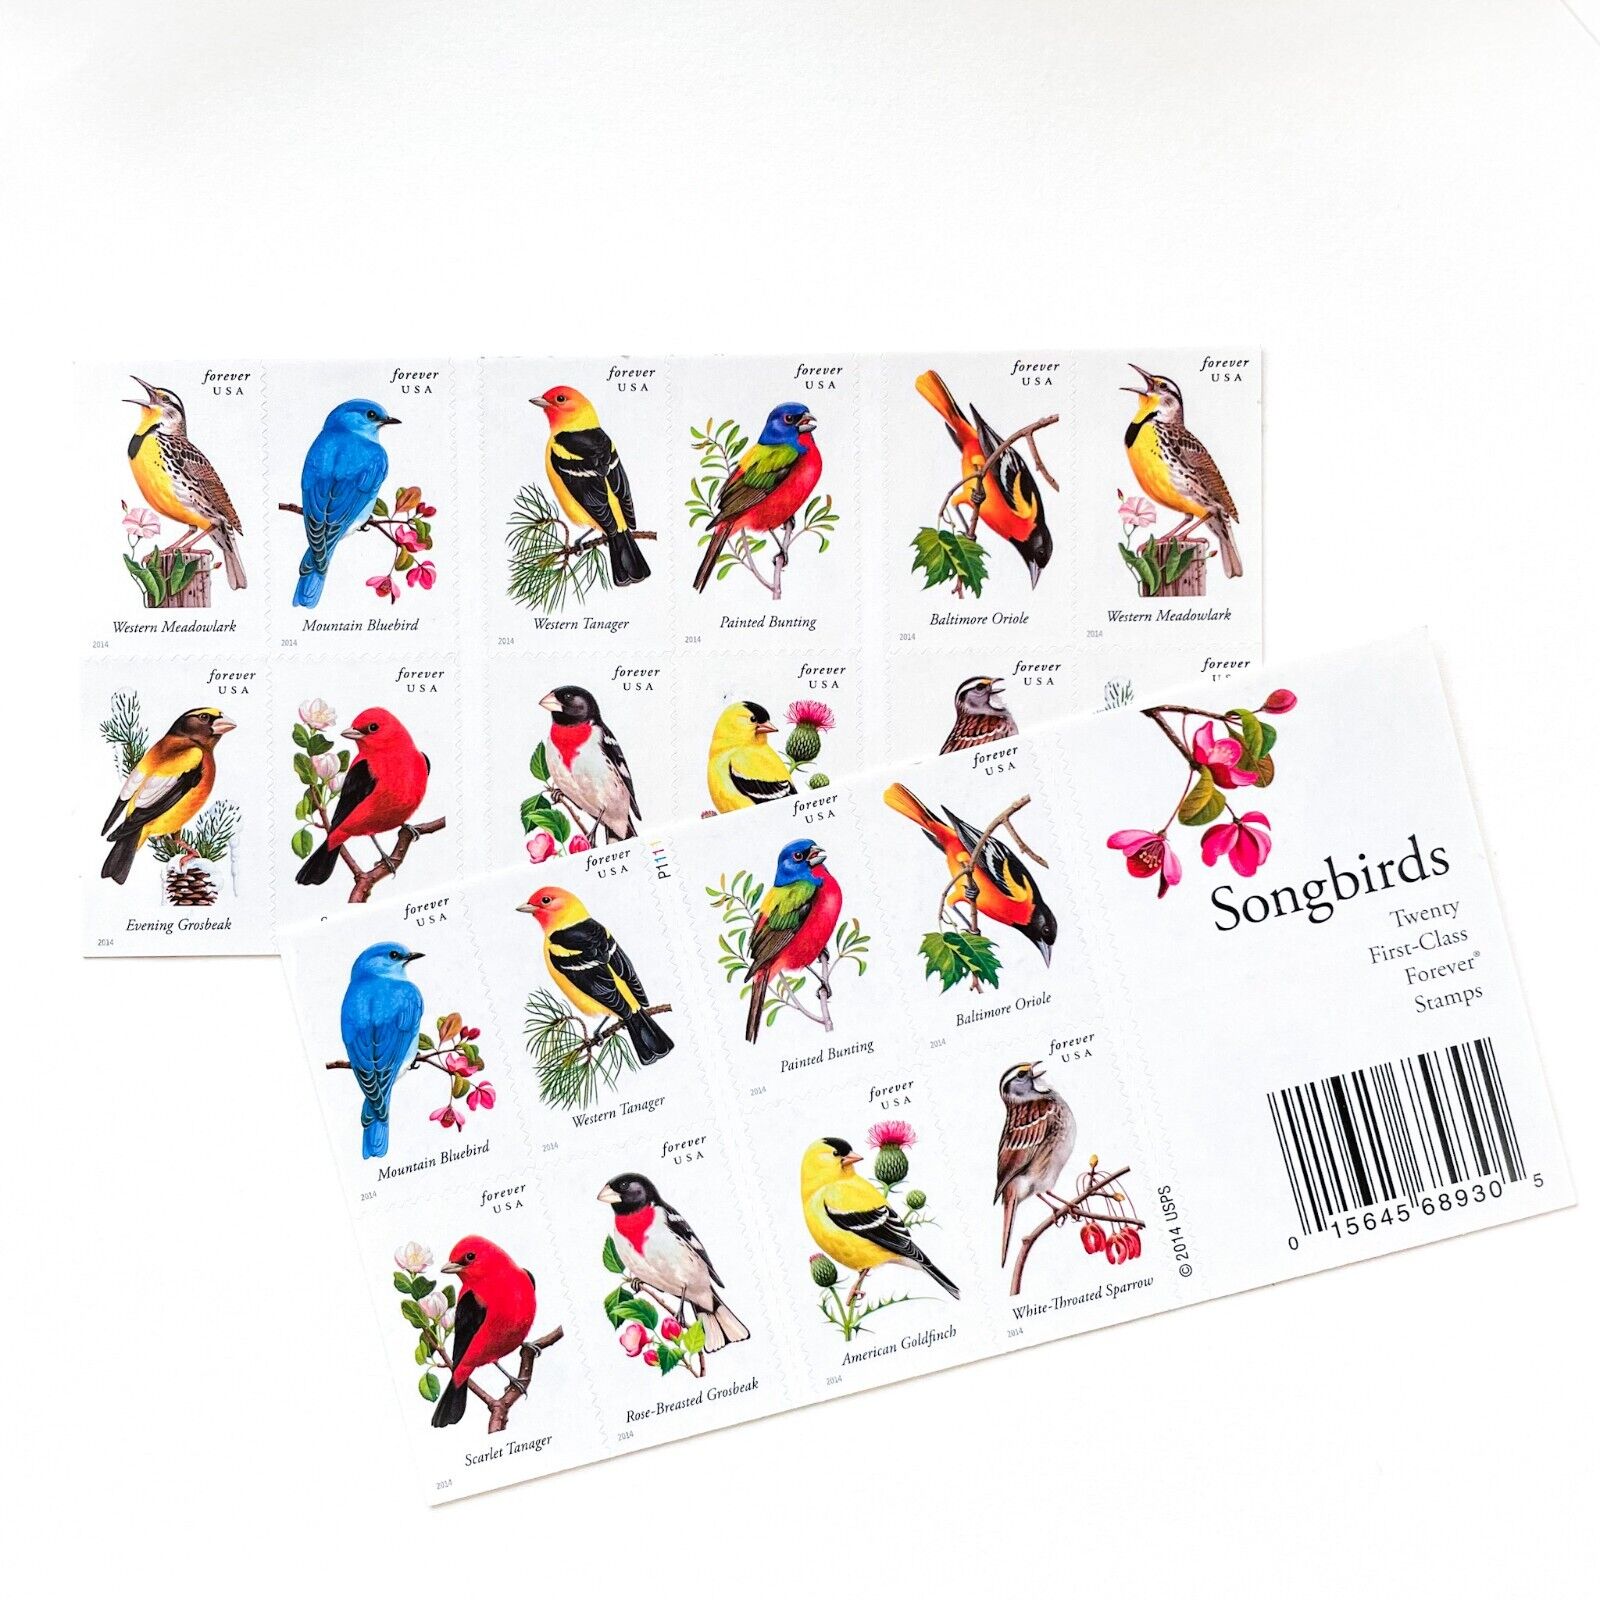 2014 Imperforate Songbirds Forever First Class Postage Stamps